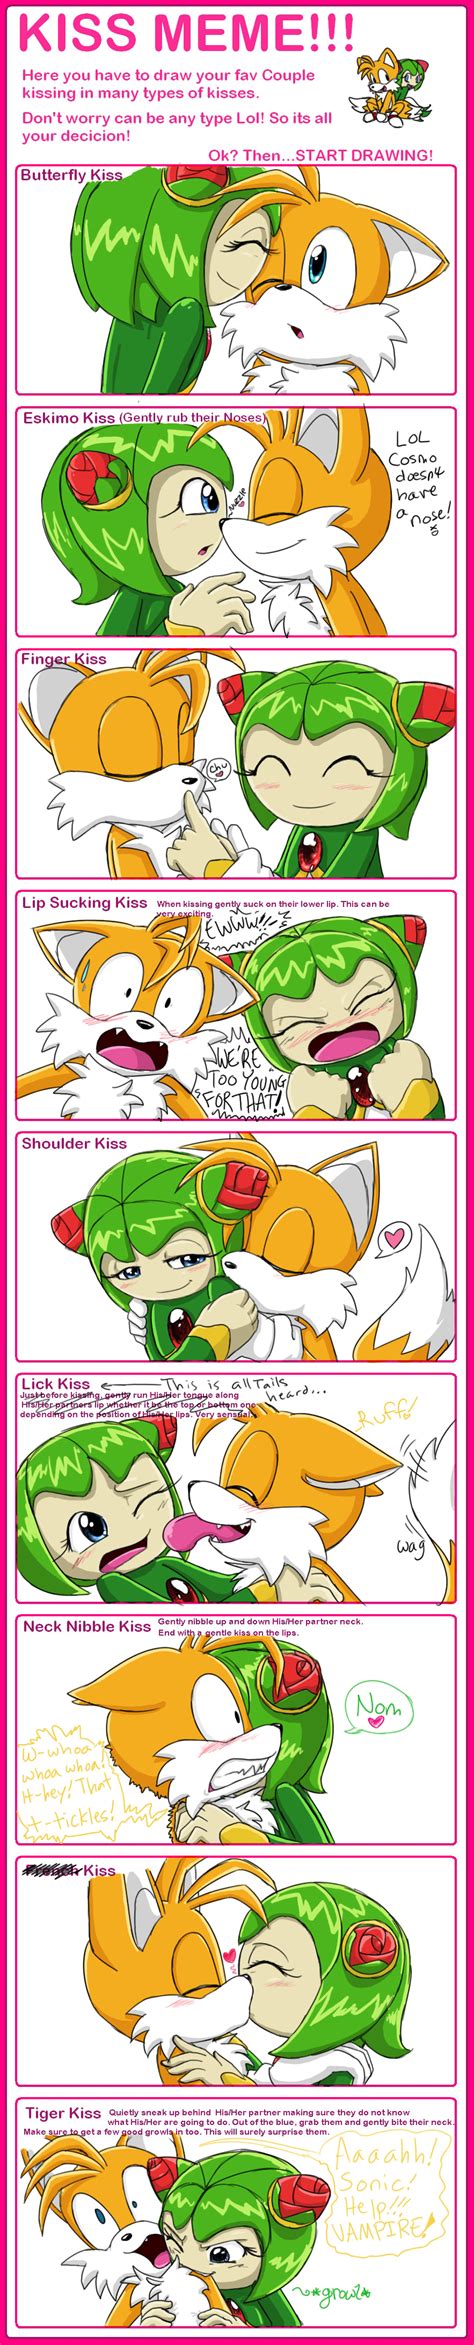 Tails and cosmo kissing подробнее. Kiss Meme_TailsXCosmo by WhiteRaven4 on DeviantArt